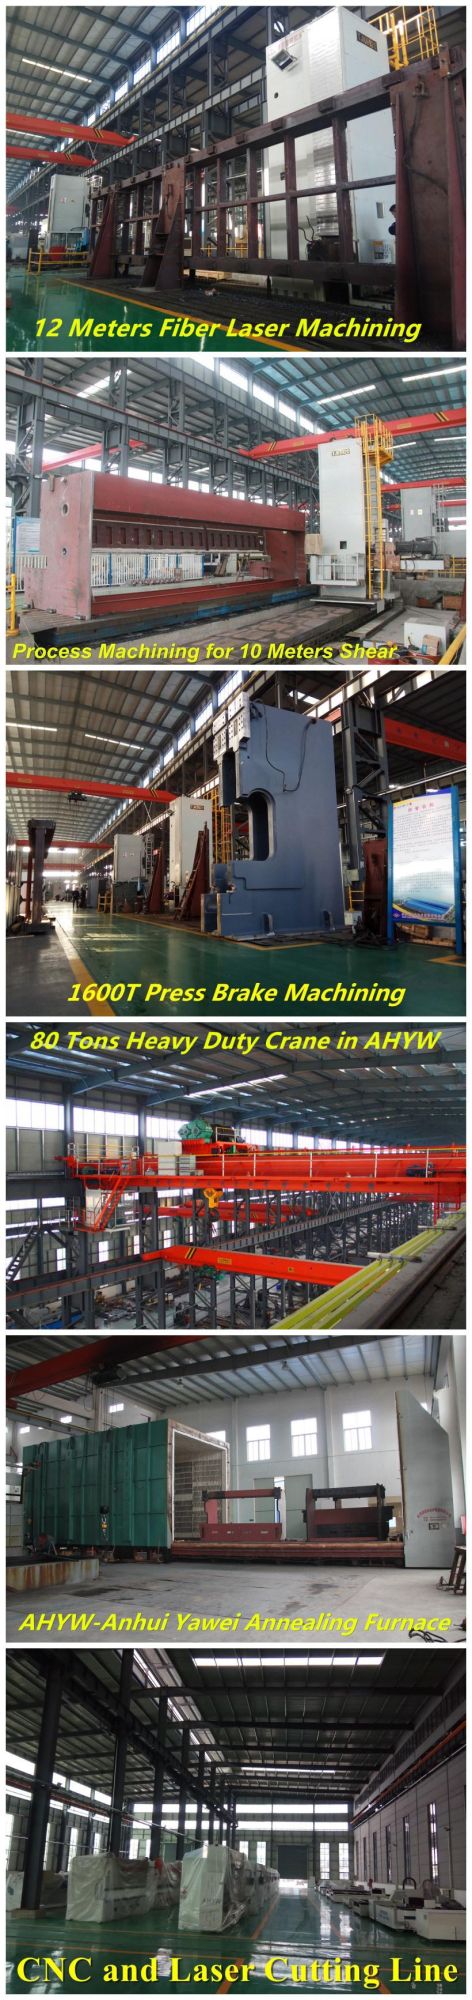 Primeline Press Brake From Anhui Yawei with Ahyw Logo for Metal Sheet Bending